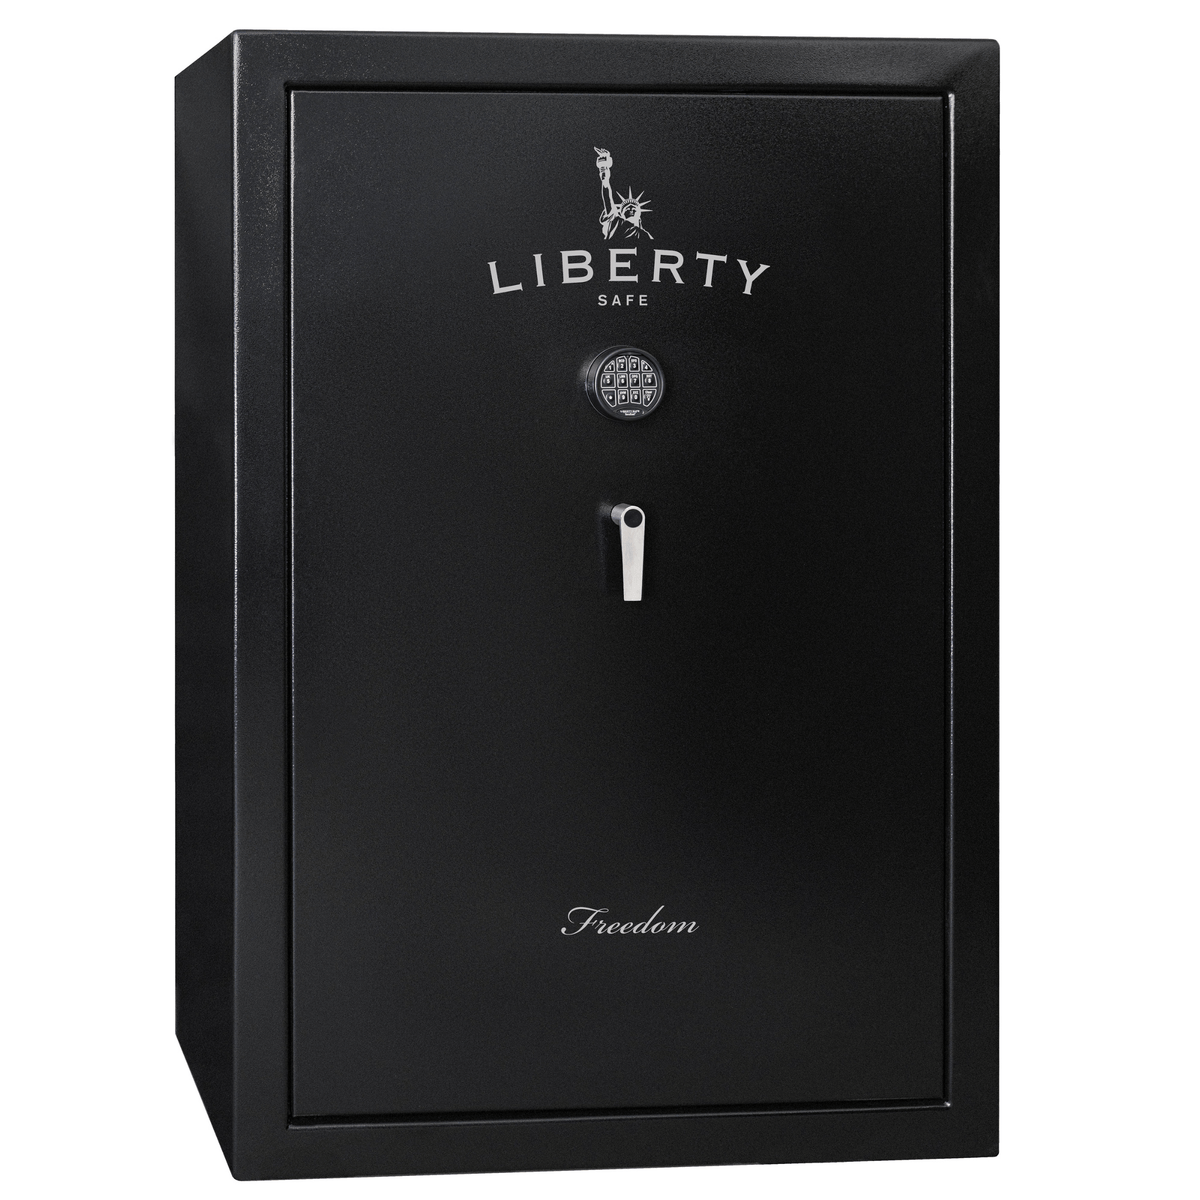 Freedom series | level 2 security | 40 minute fire rating - entry-level safe - MODLOCK